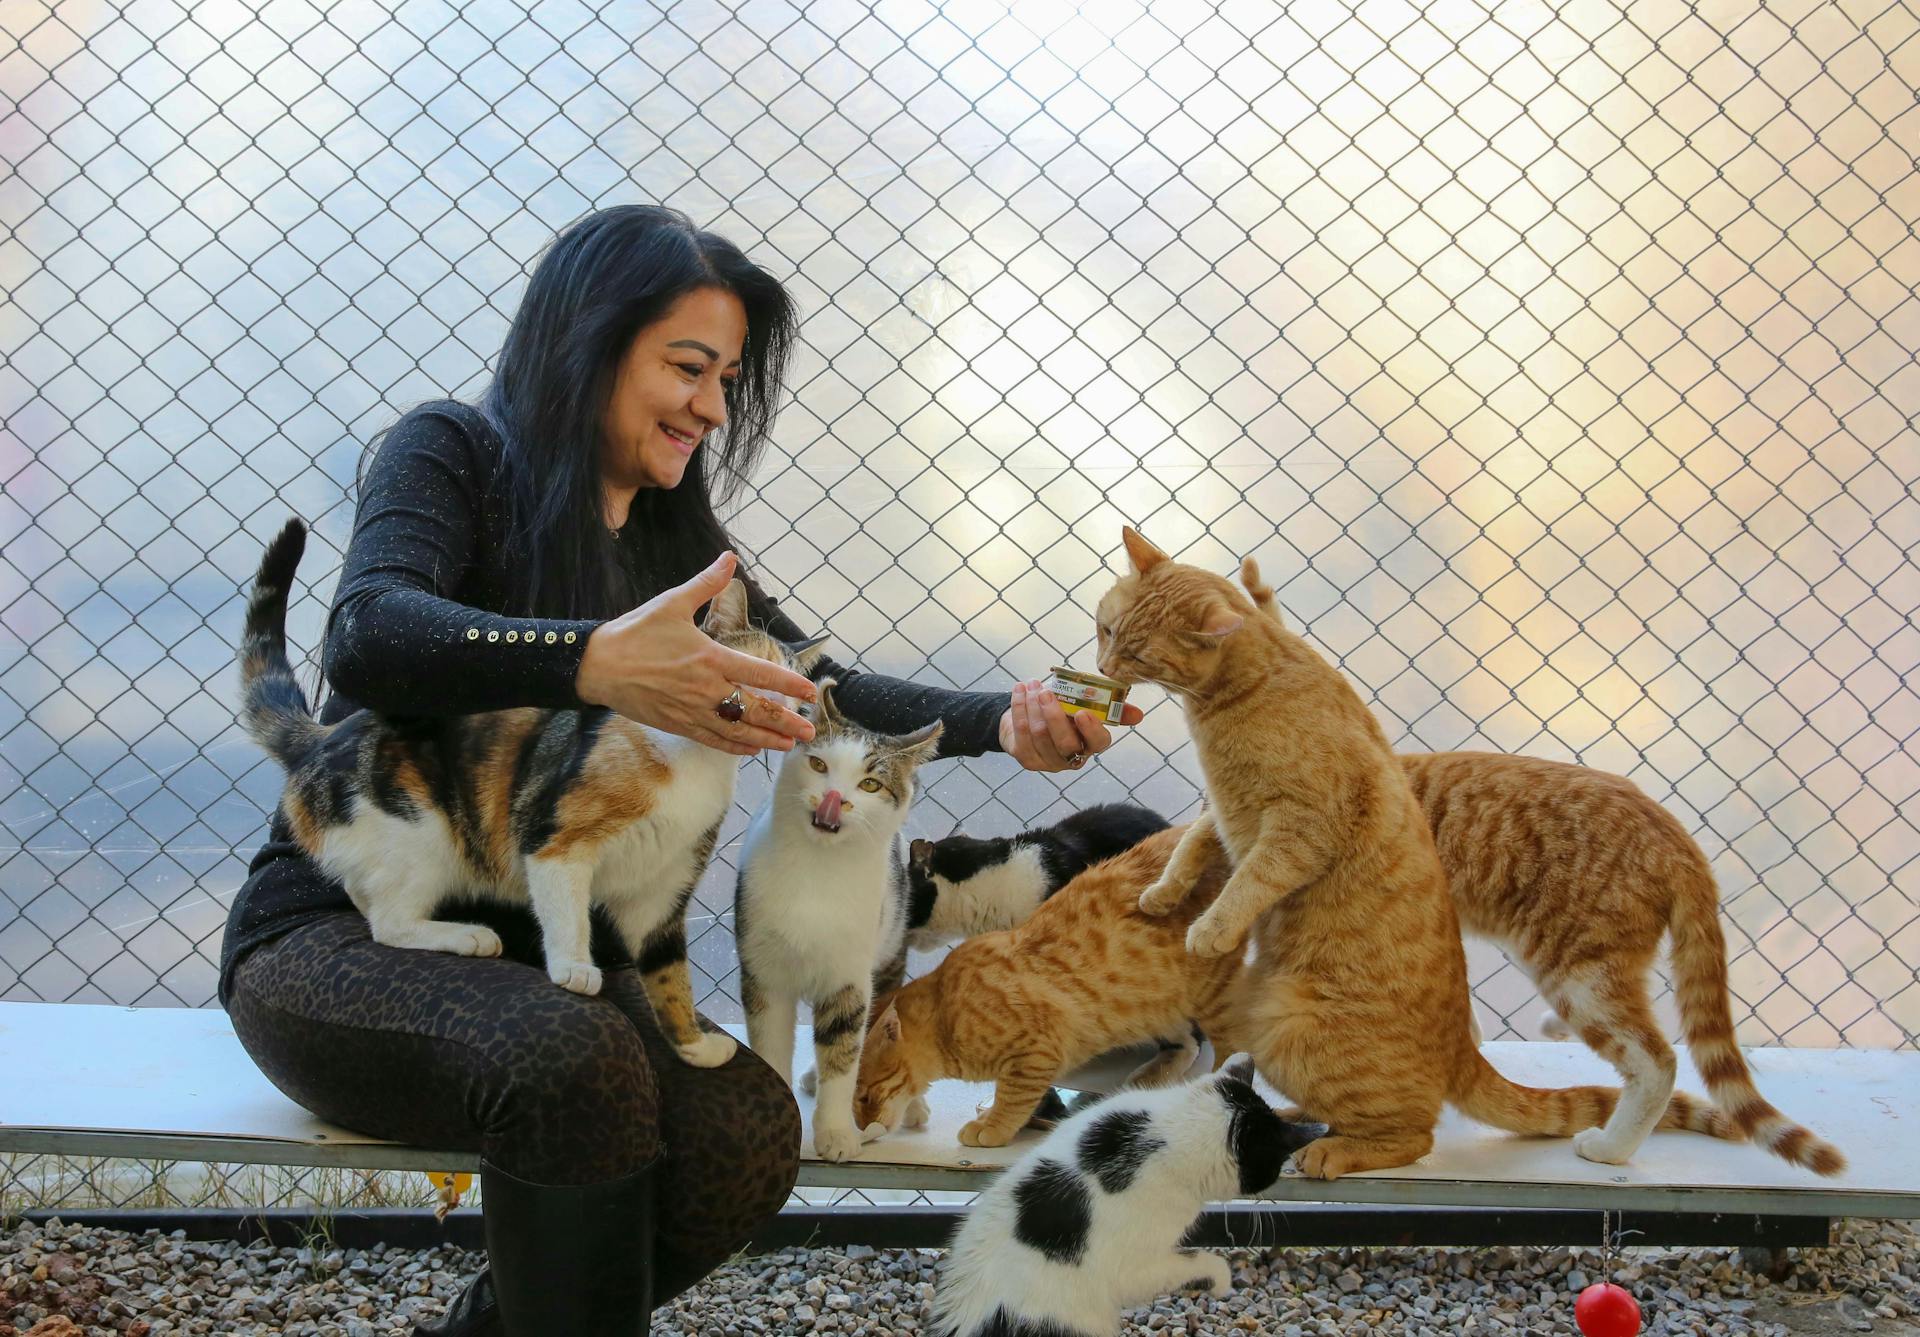 Smiling Woman Feeding Cats with Canned Cat Food